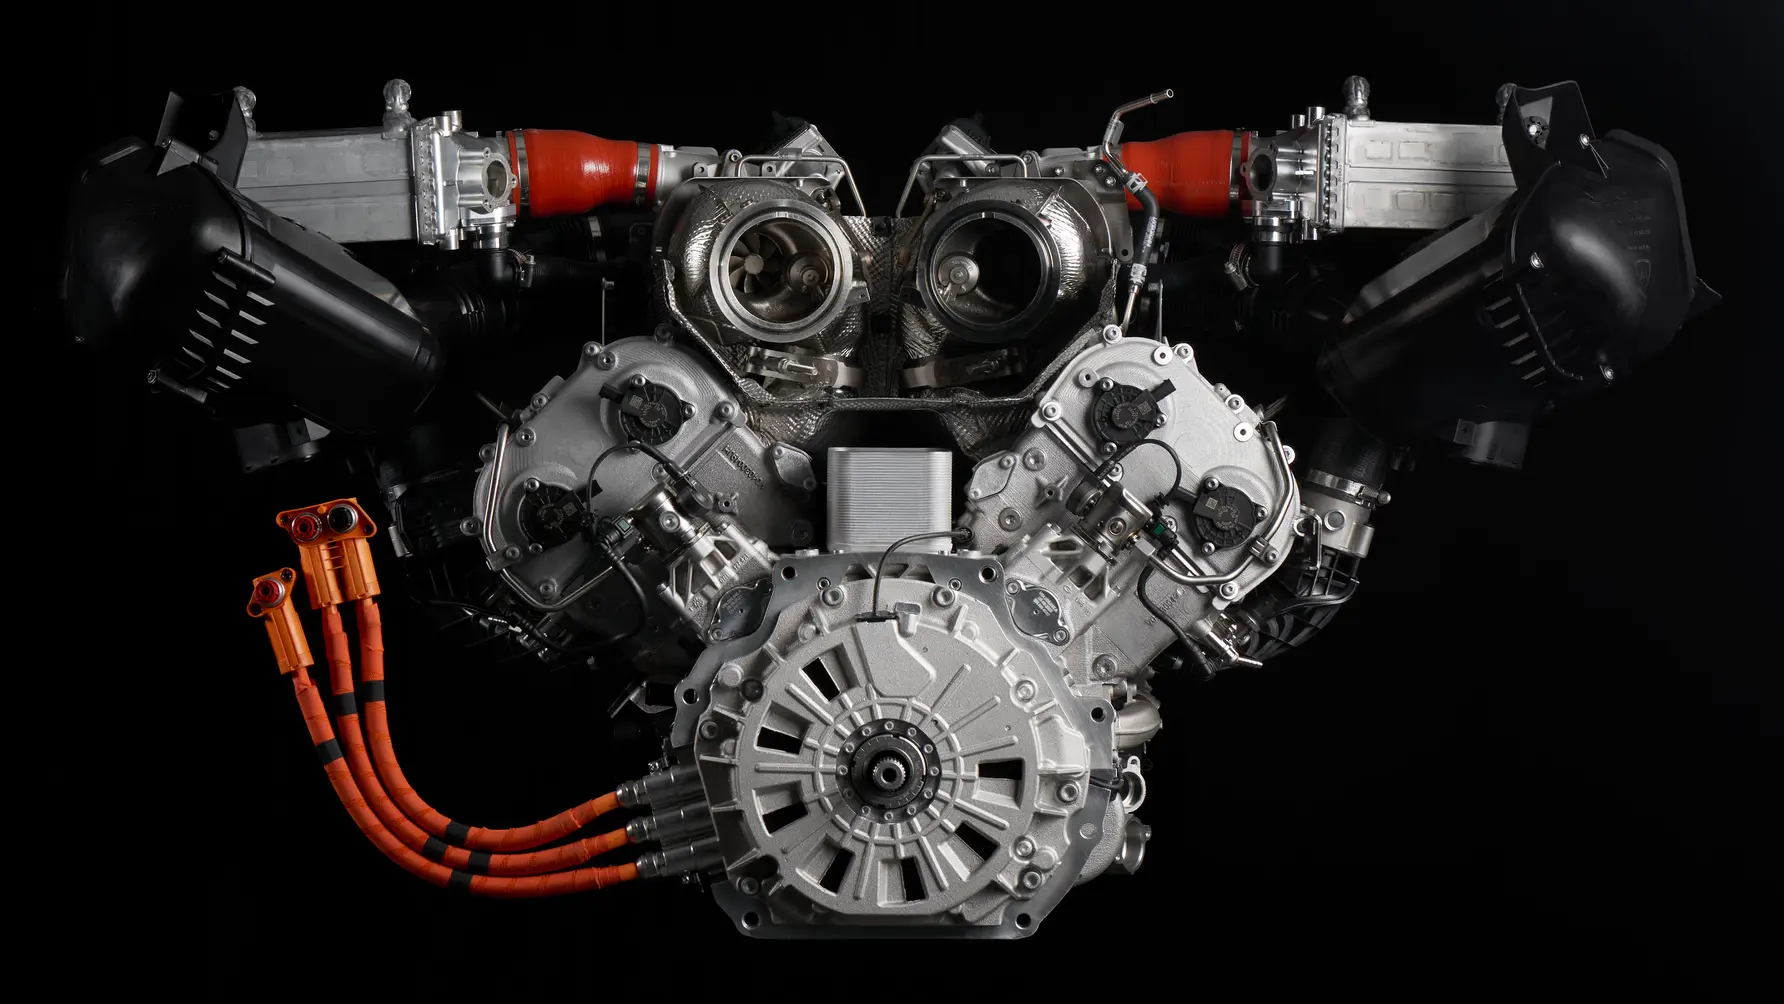 10,000 RPM, Two Turbos, and Three Electric Motors for Lamborghini’s New V8